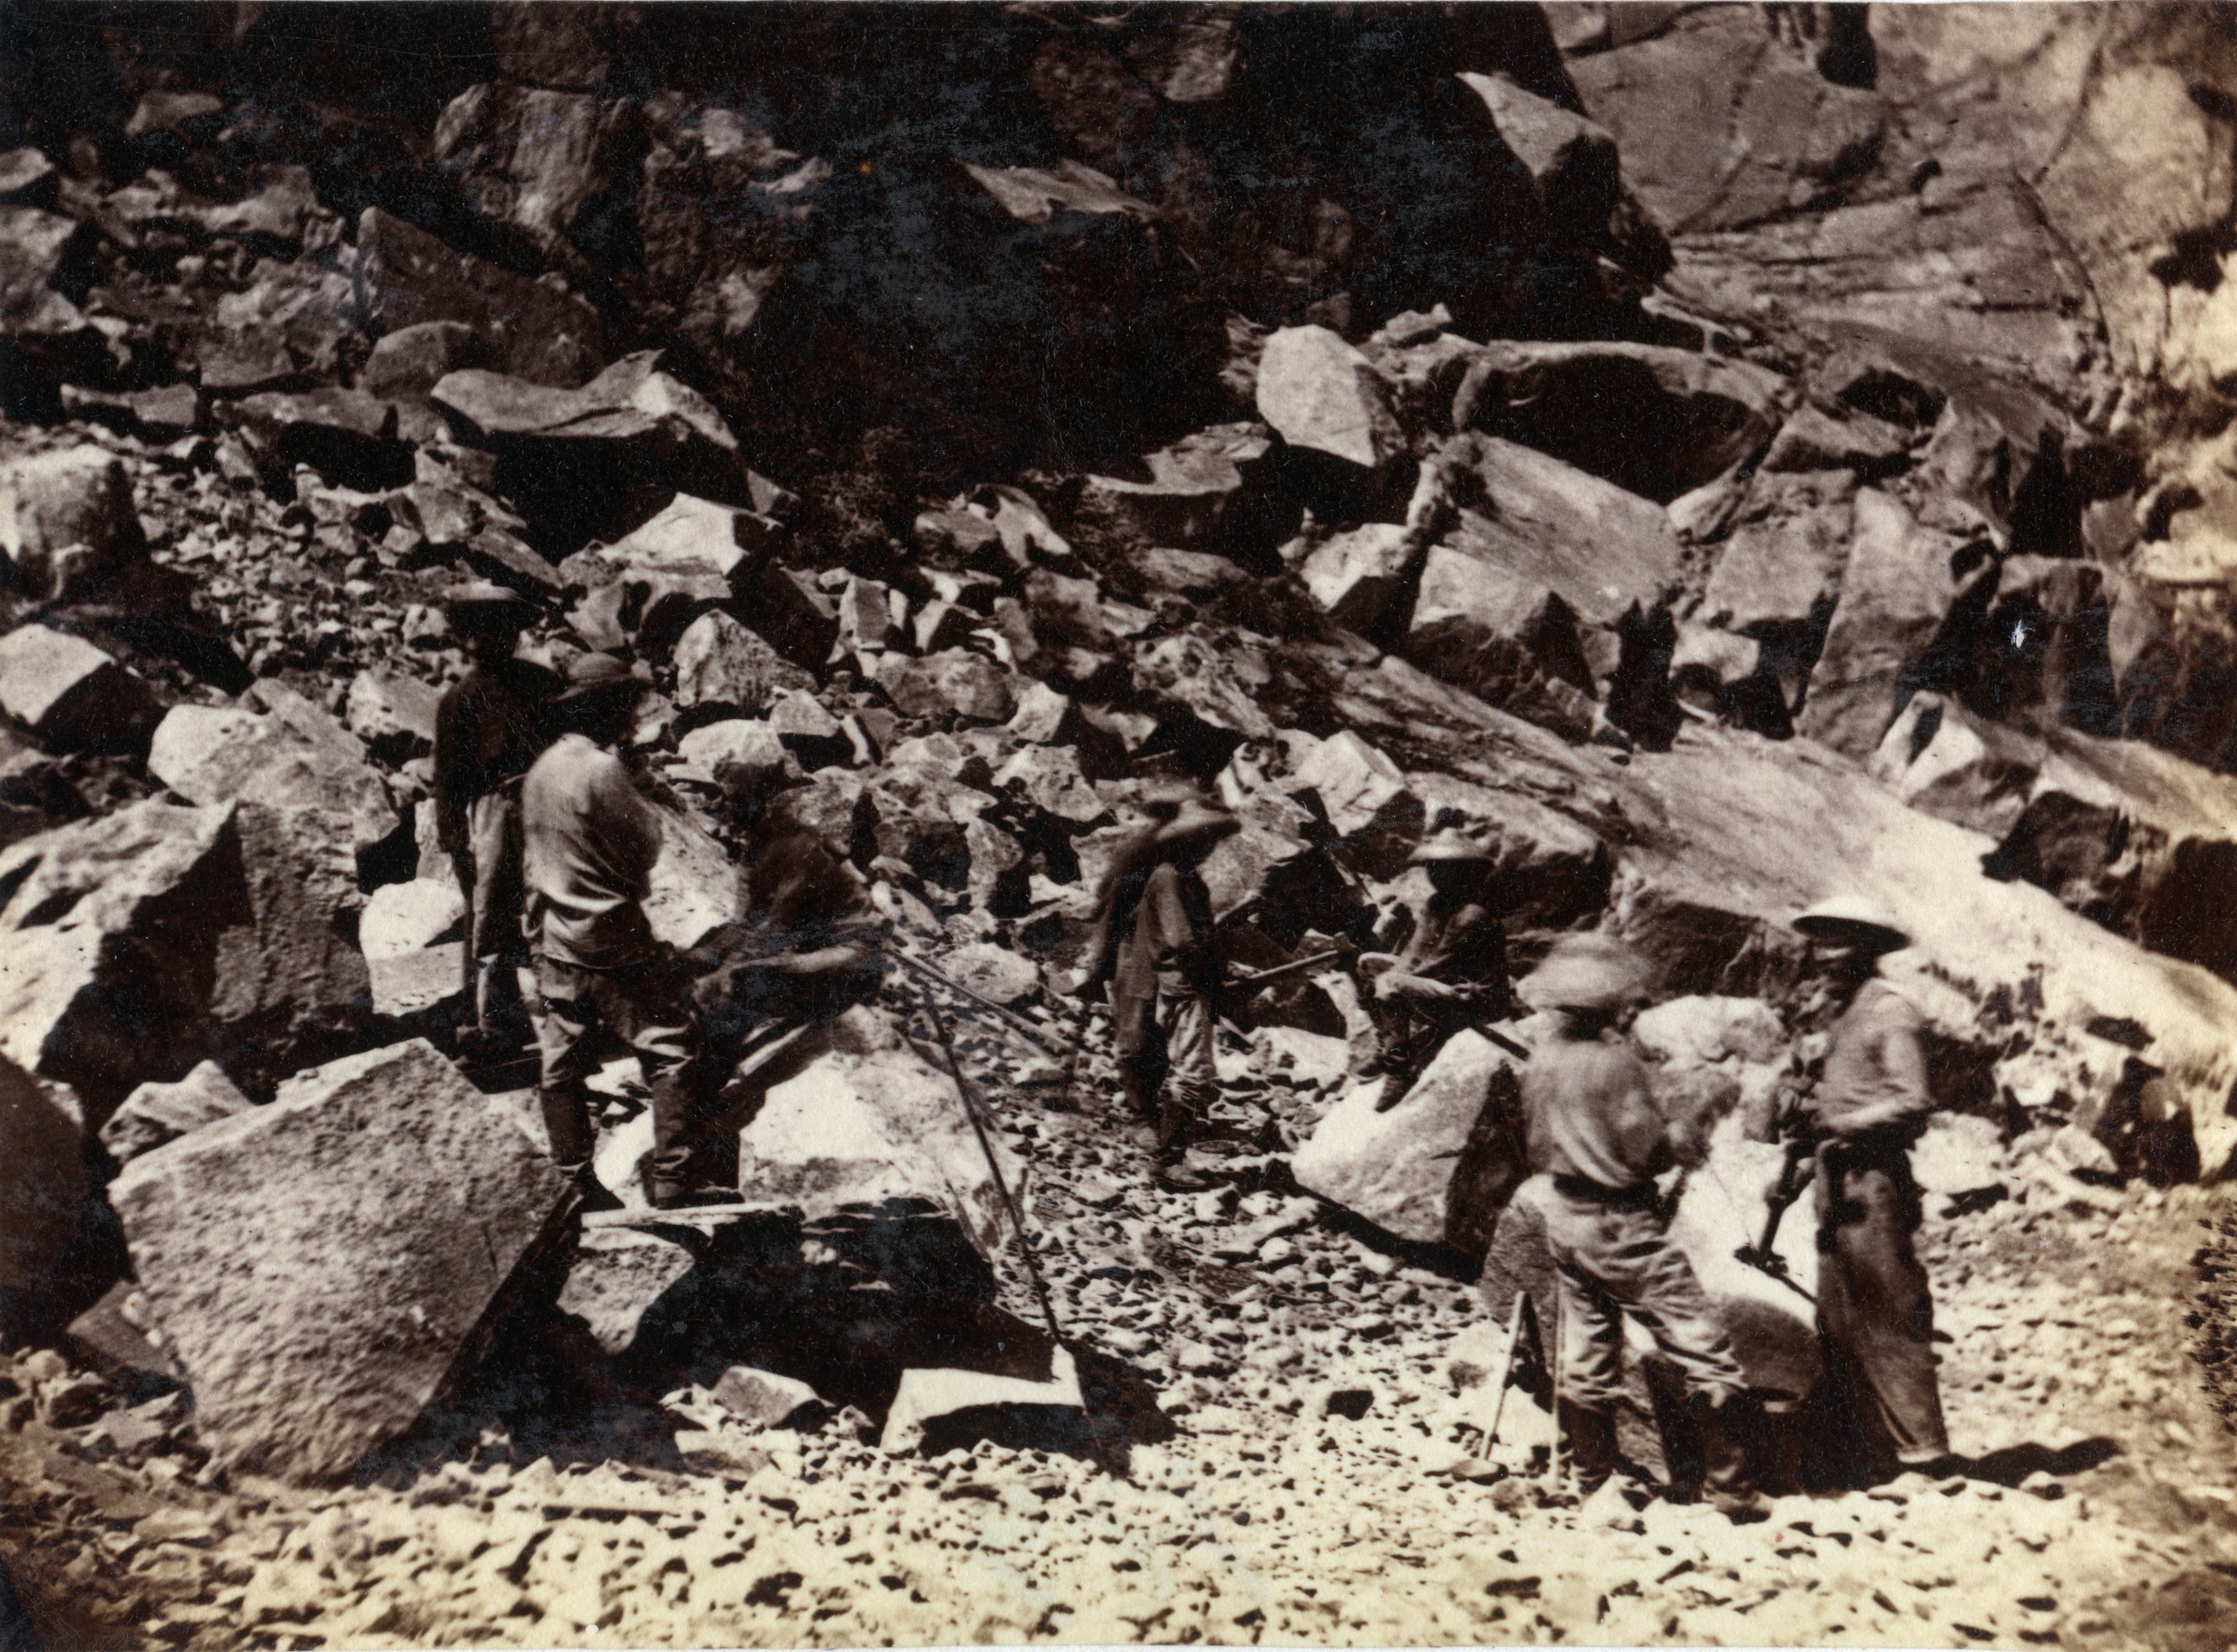 transcontinental railroad workers conditions